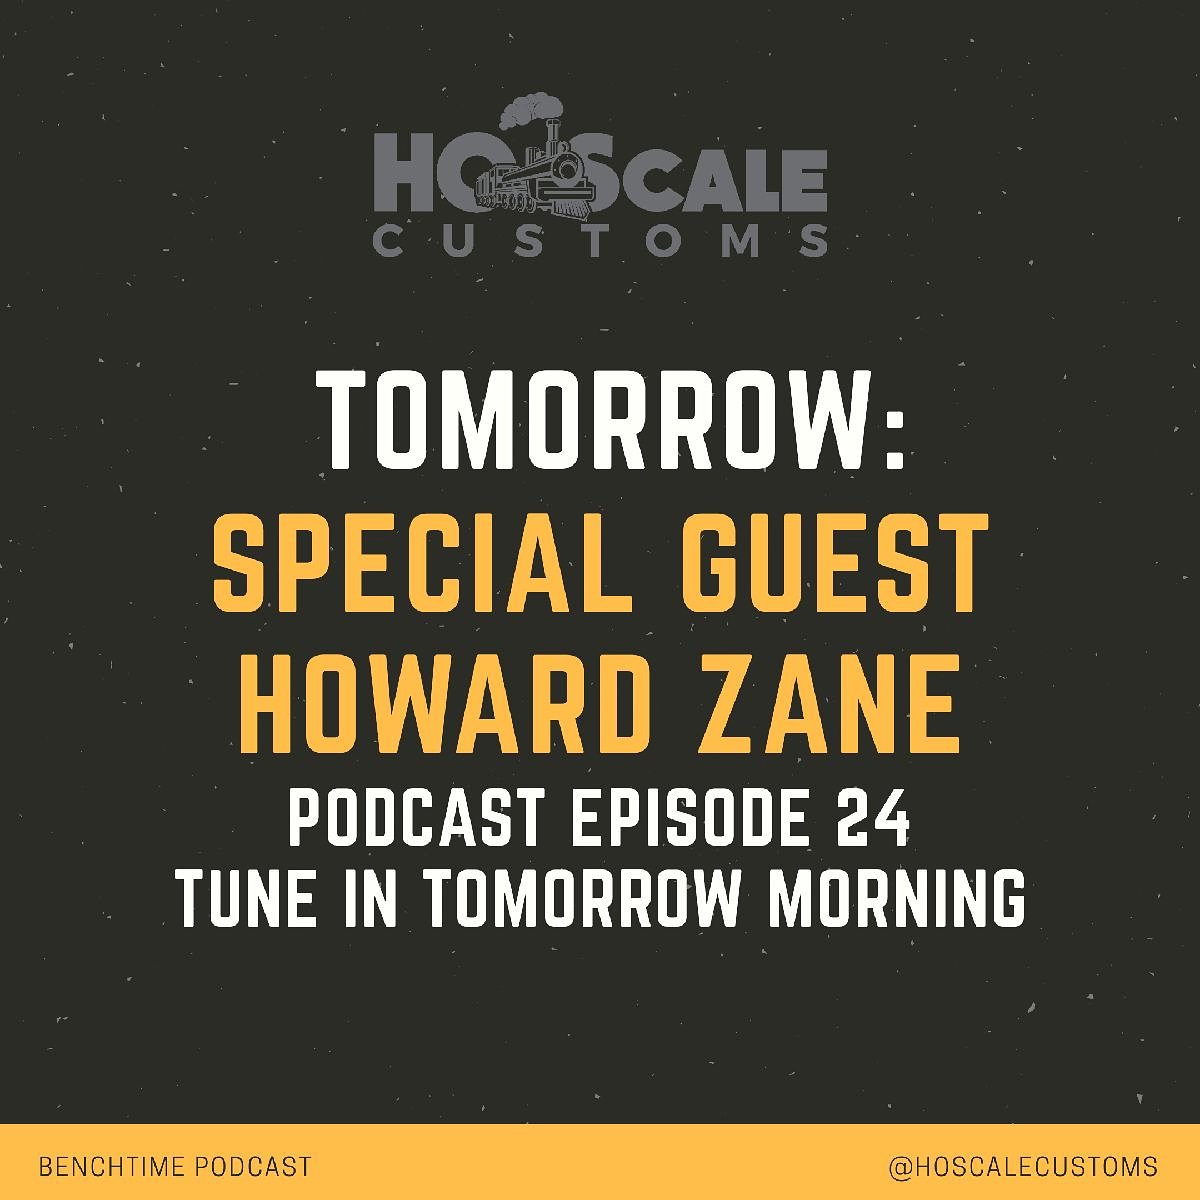 Make sure you tune into the Bench Time Podcast tomorrow! We've got a very special guest, Howard Zane!

Episode 24 goes live tomorrow morning and don't miss out, it's going to be a good one!

#podcast #modelrailroading #modeltrains #railroadlayout #patreon #finescalemodeler